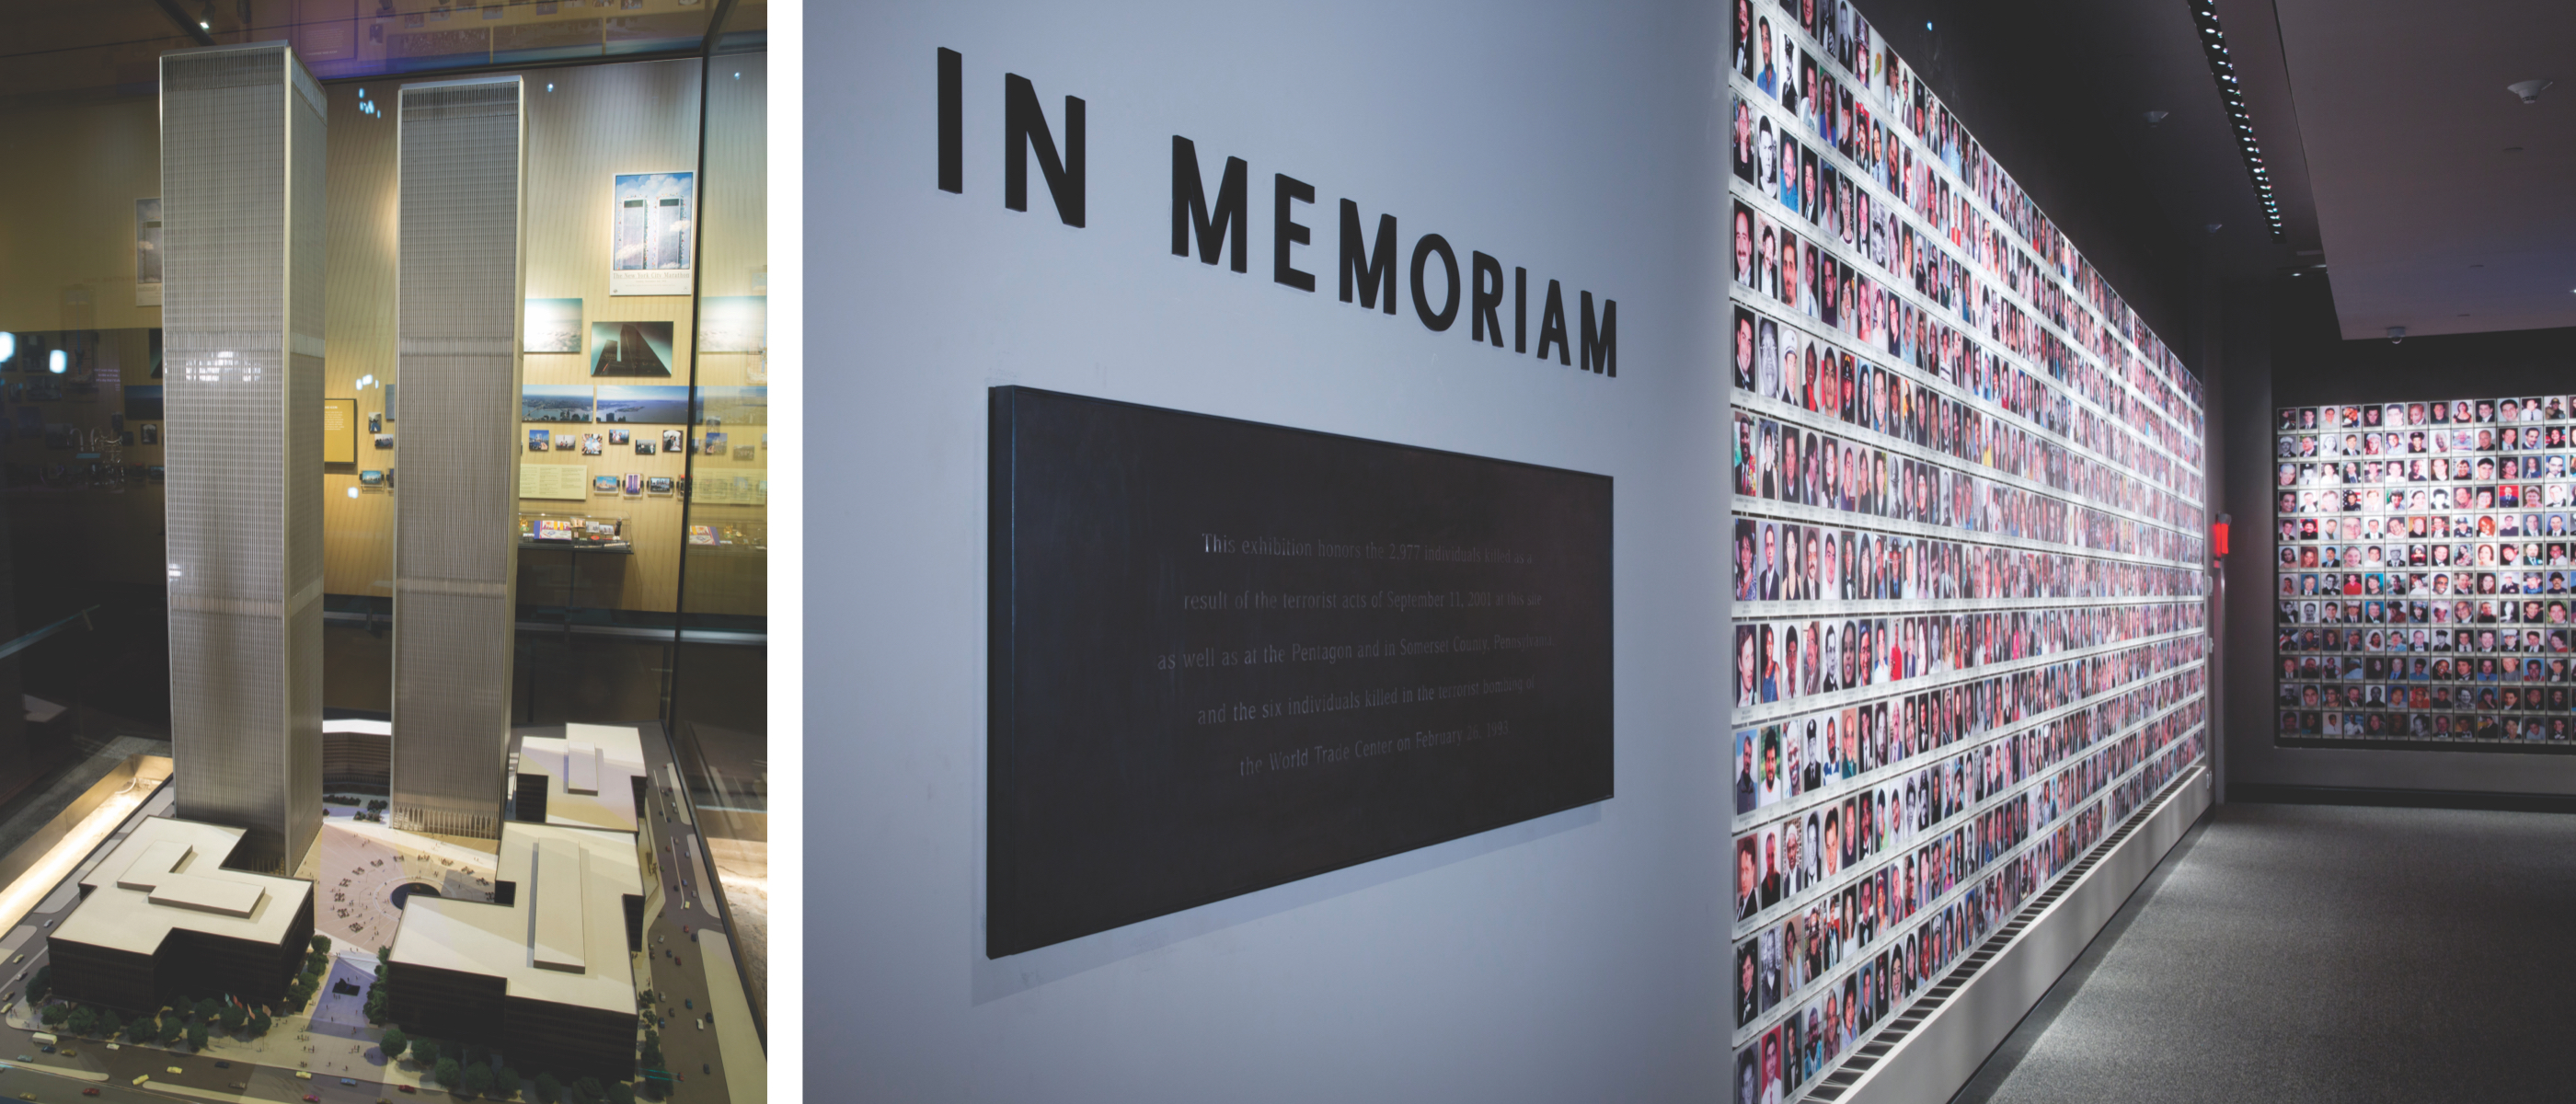 IN MEMORIAM: The memorial exhibition honors the 2,977 people killed as a result of the terrorist attacks of Sept. 11, 2001, and the six people killed in the terrorist bombing of the World Trade Center on Feb. 26, 1993.